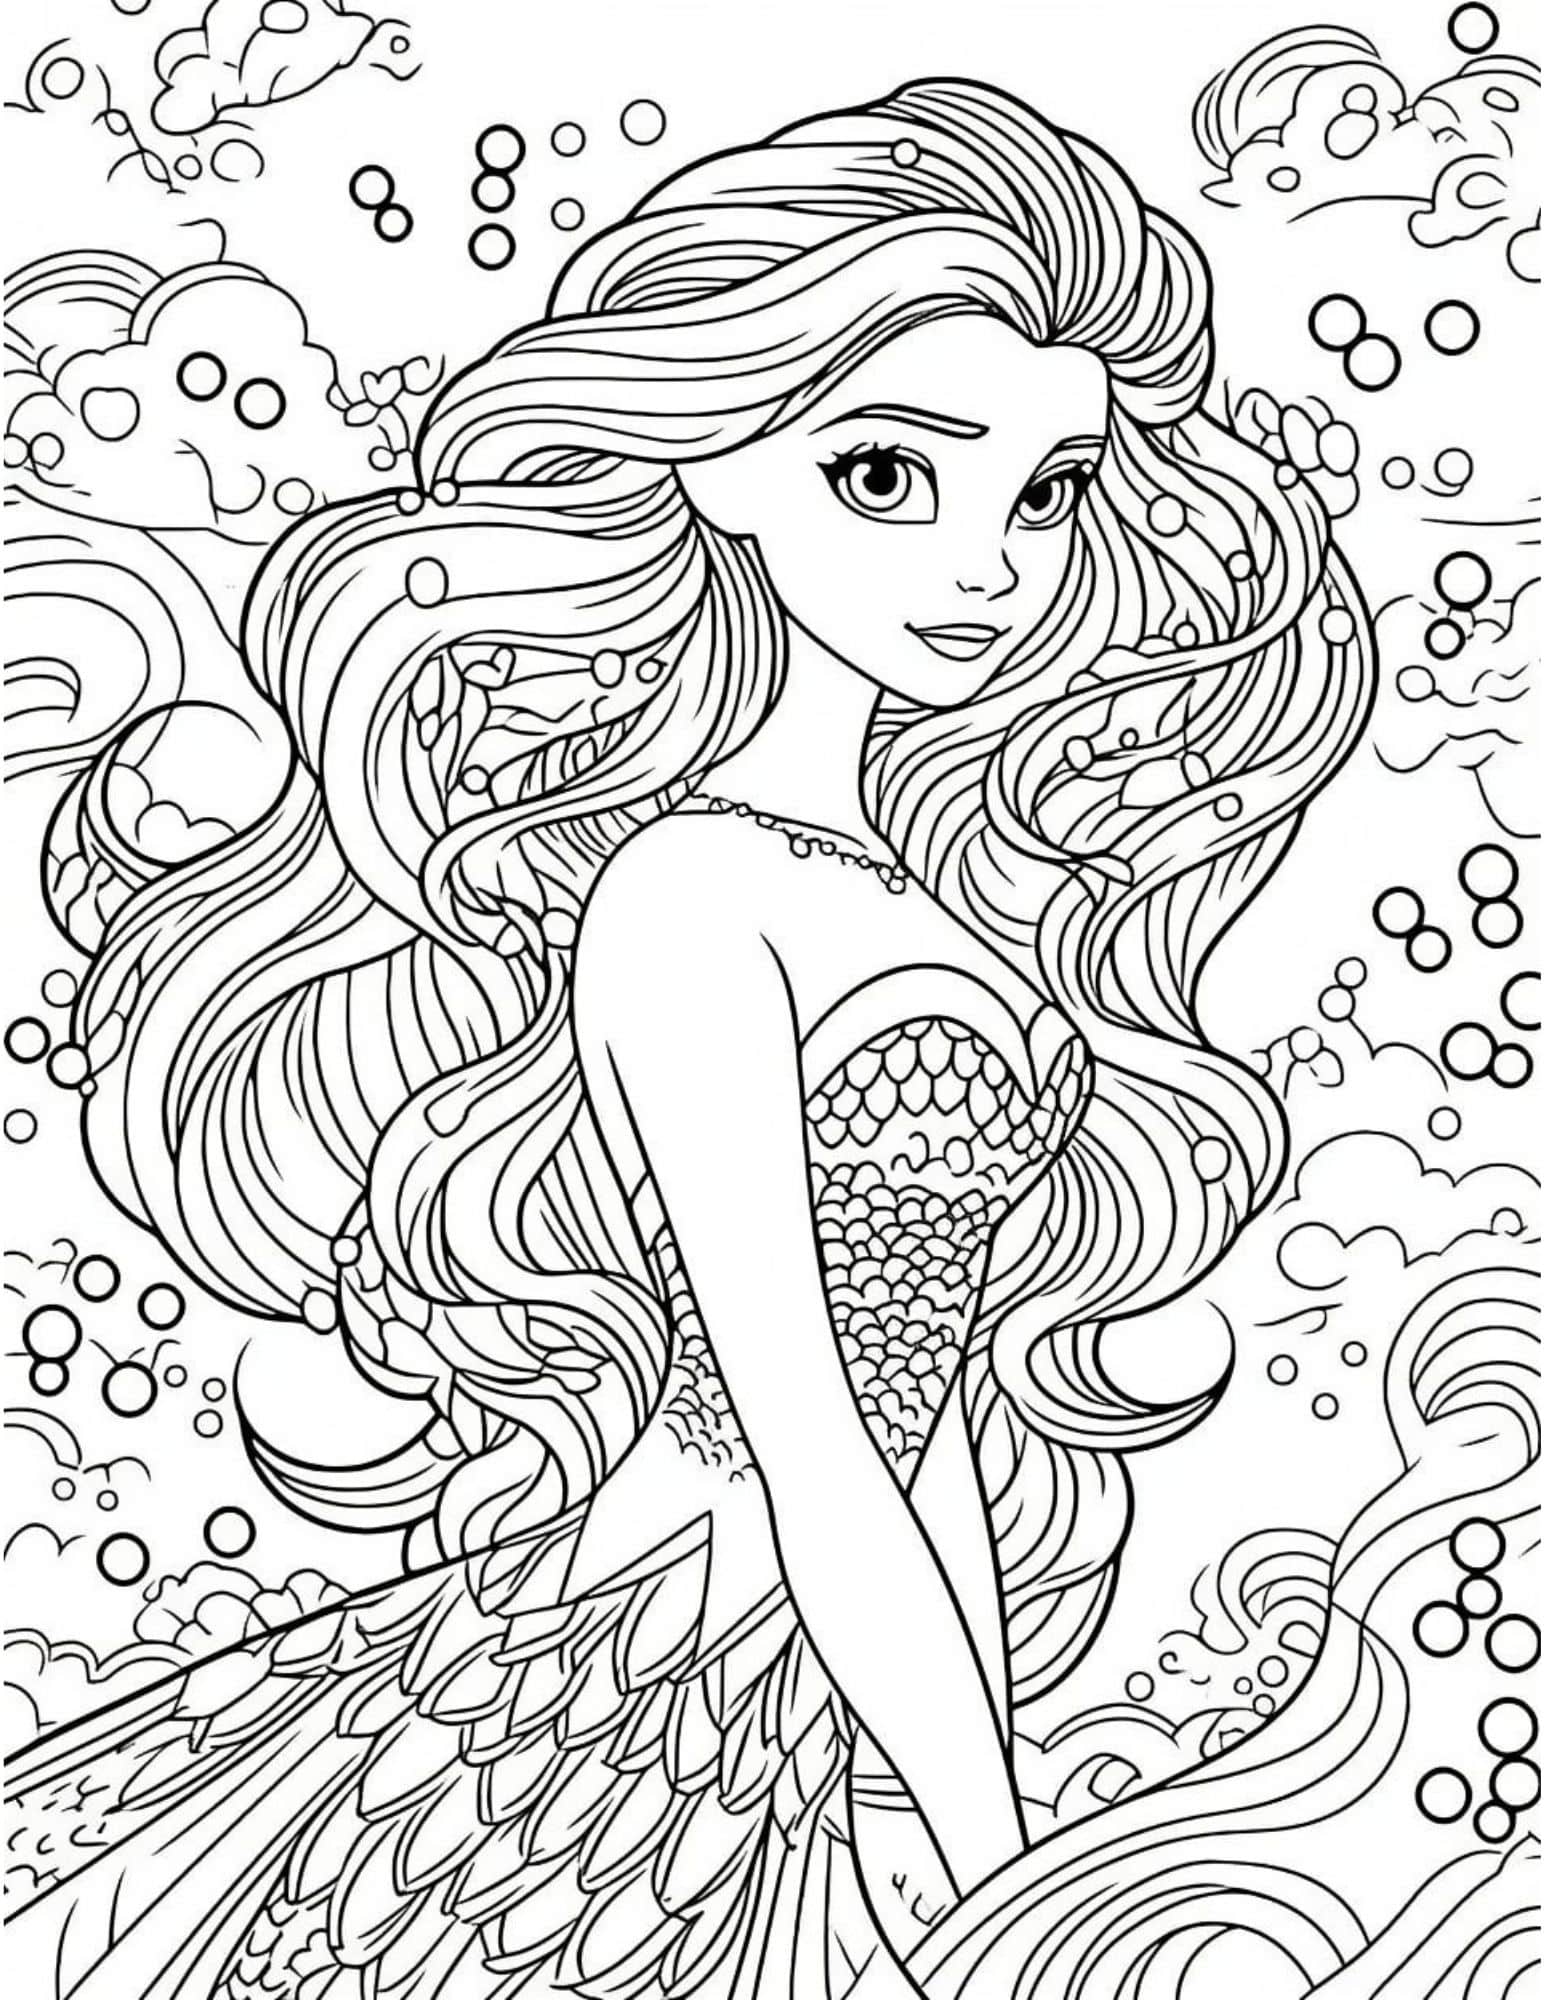 Create Barbie House with Surprise Characters coloring page